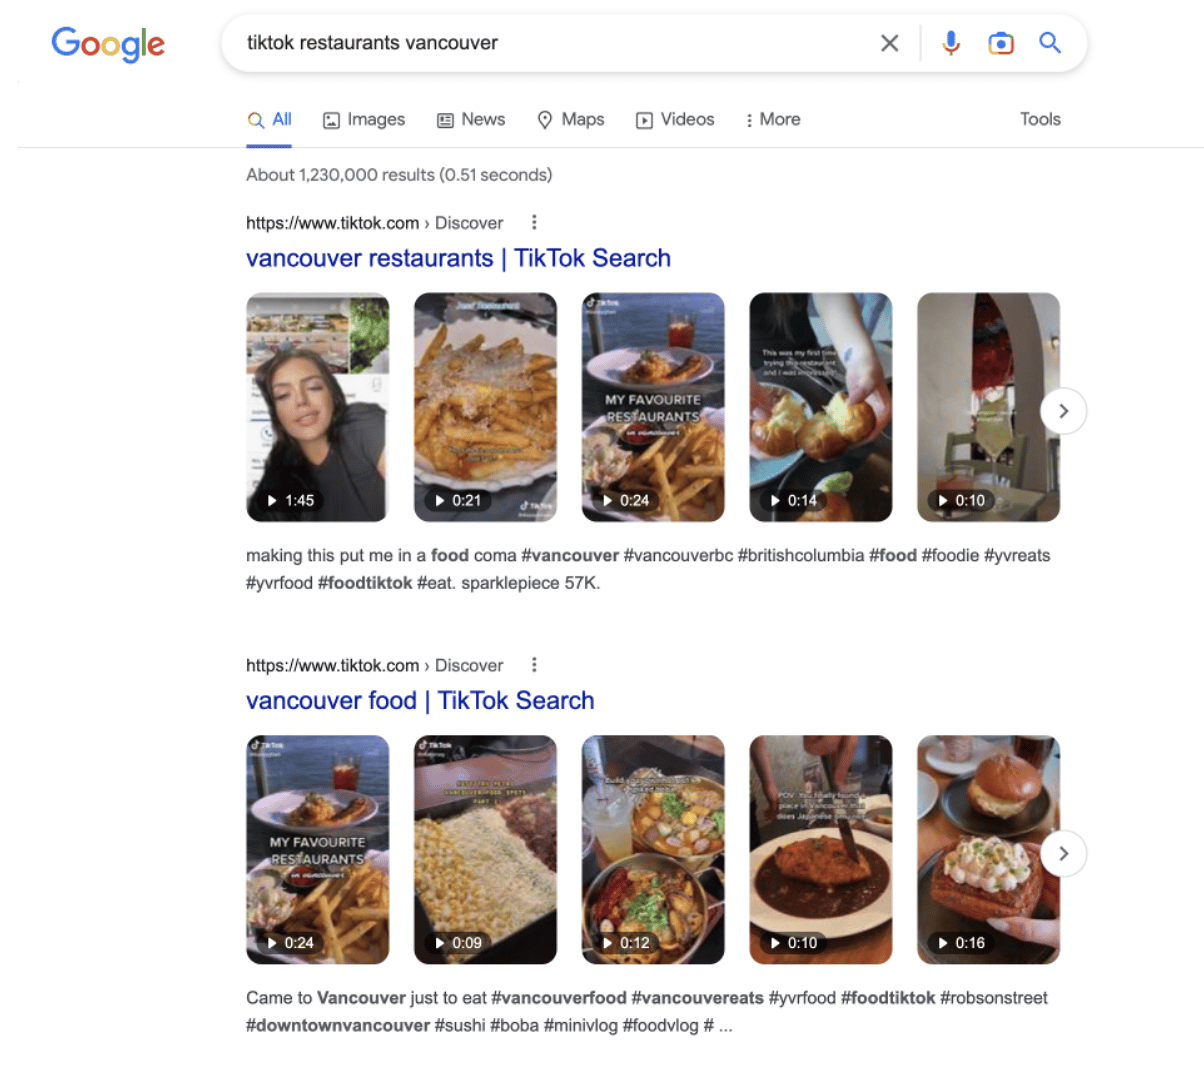 google search result for restaurants in vancouver showing tiktok videos